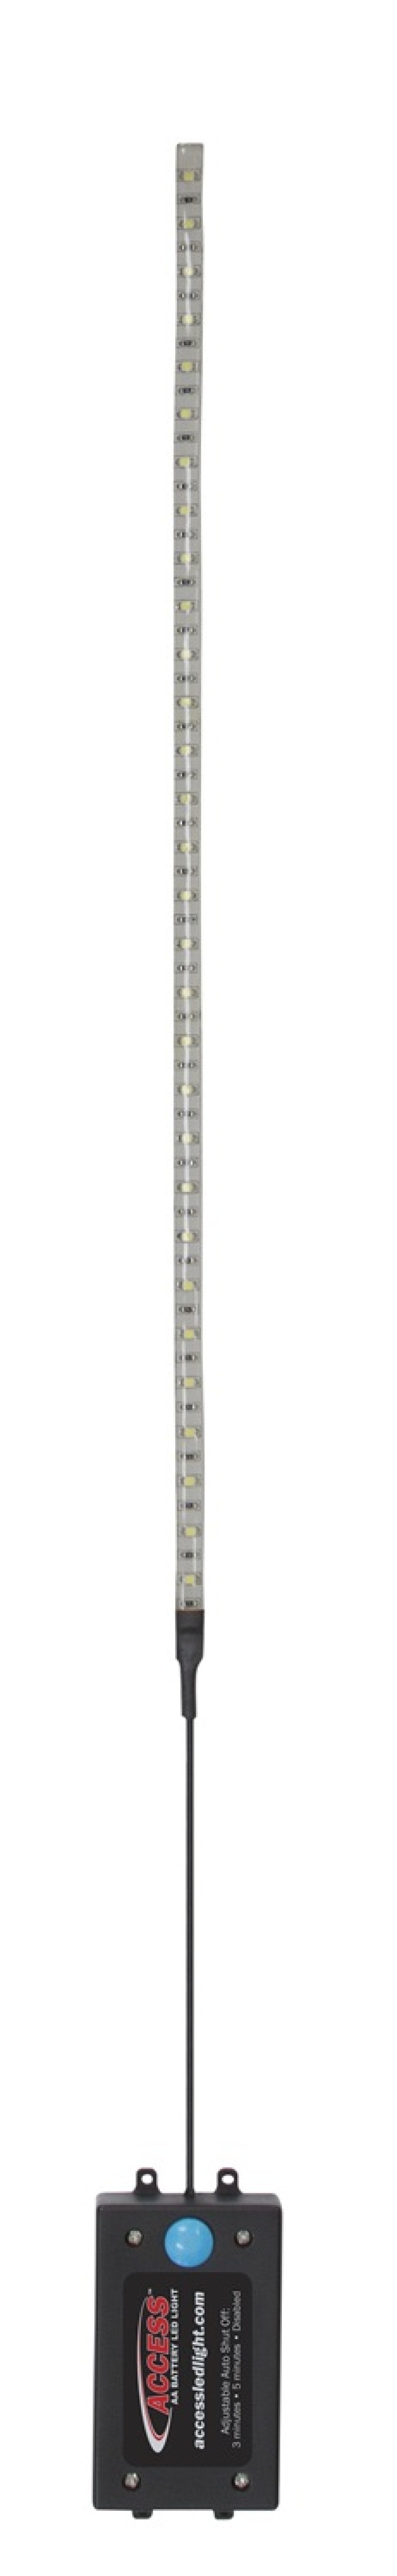 Access Accessories 39in LED Strip Light - 1 Single Pack 80150 Main Image